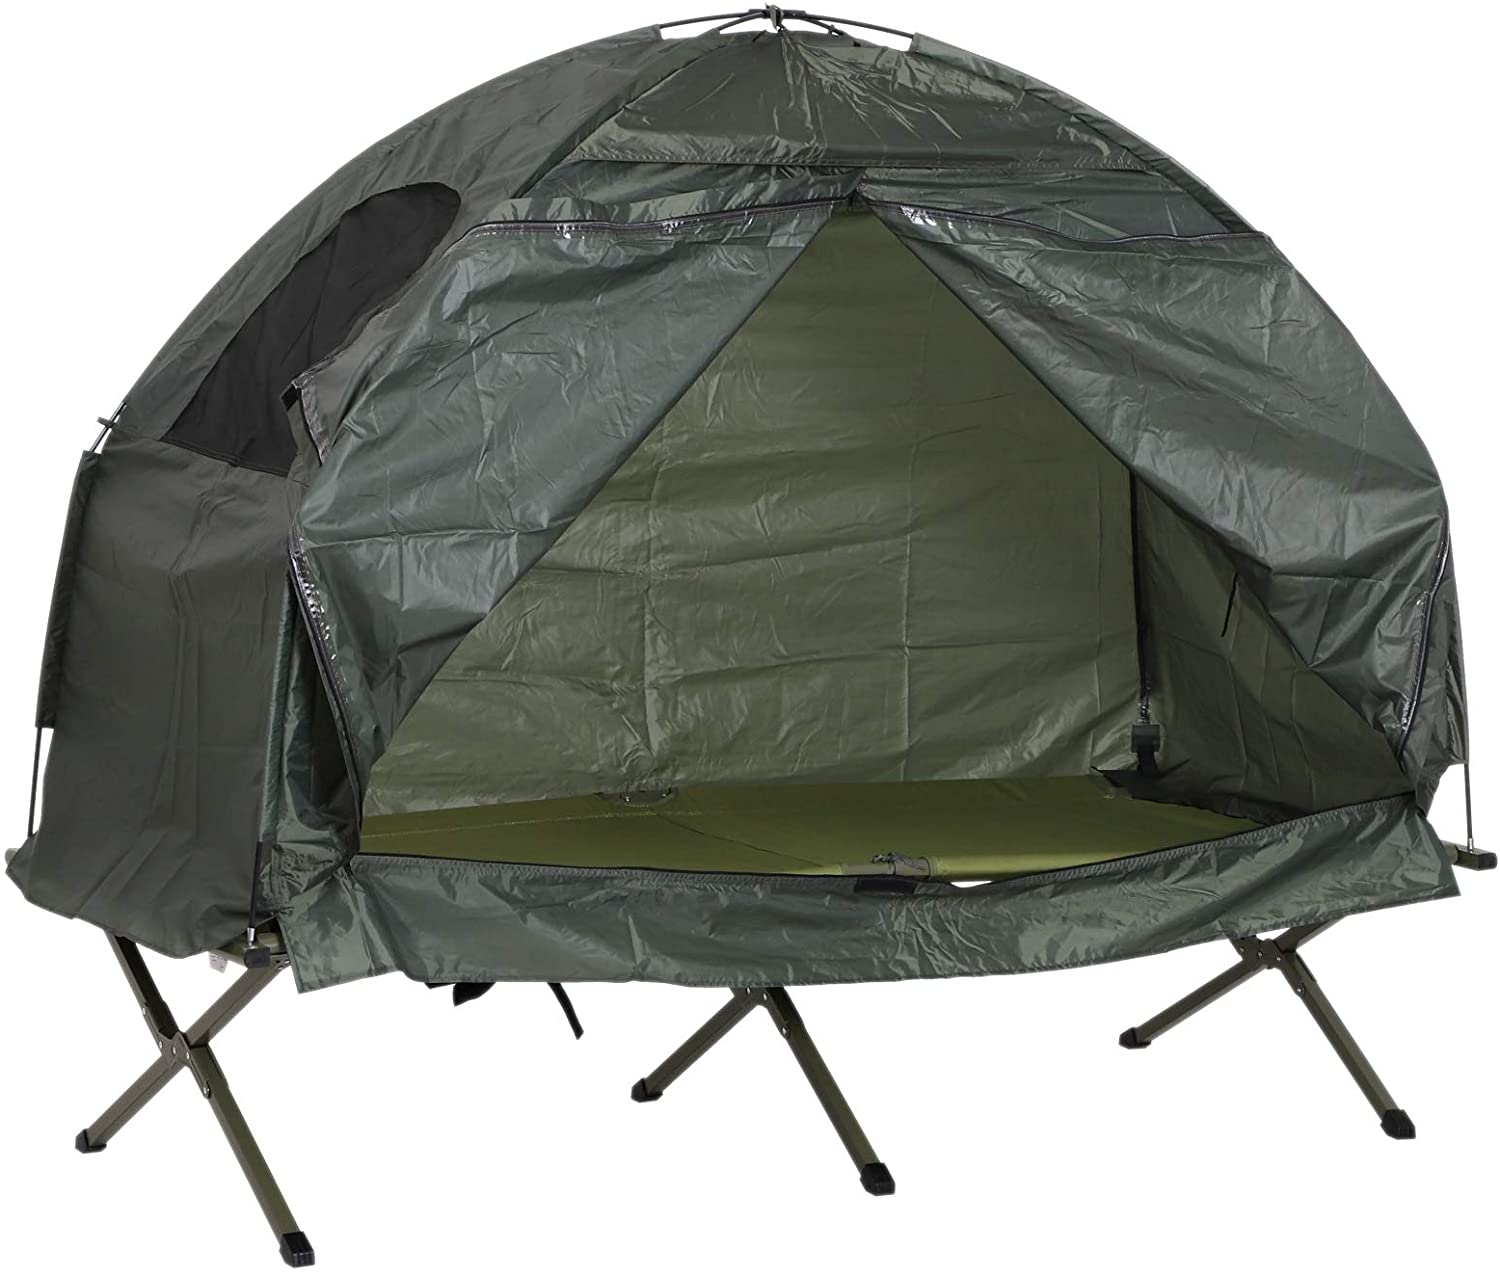 Outsunny 1 Person Camping Cot Tent